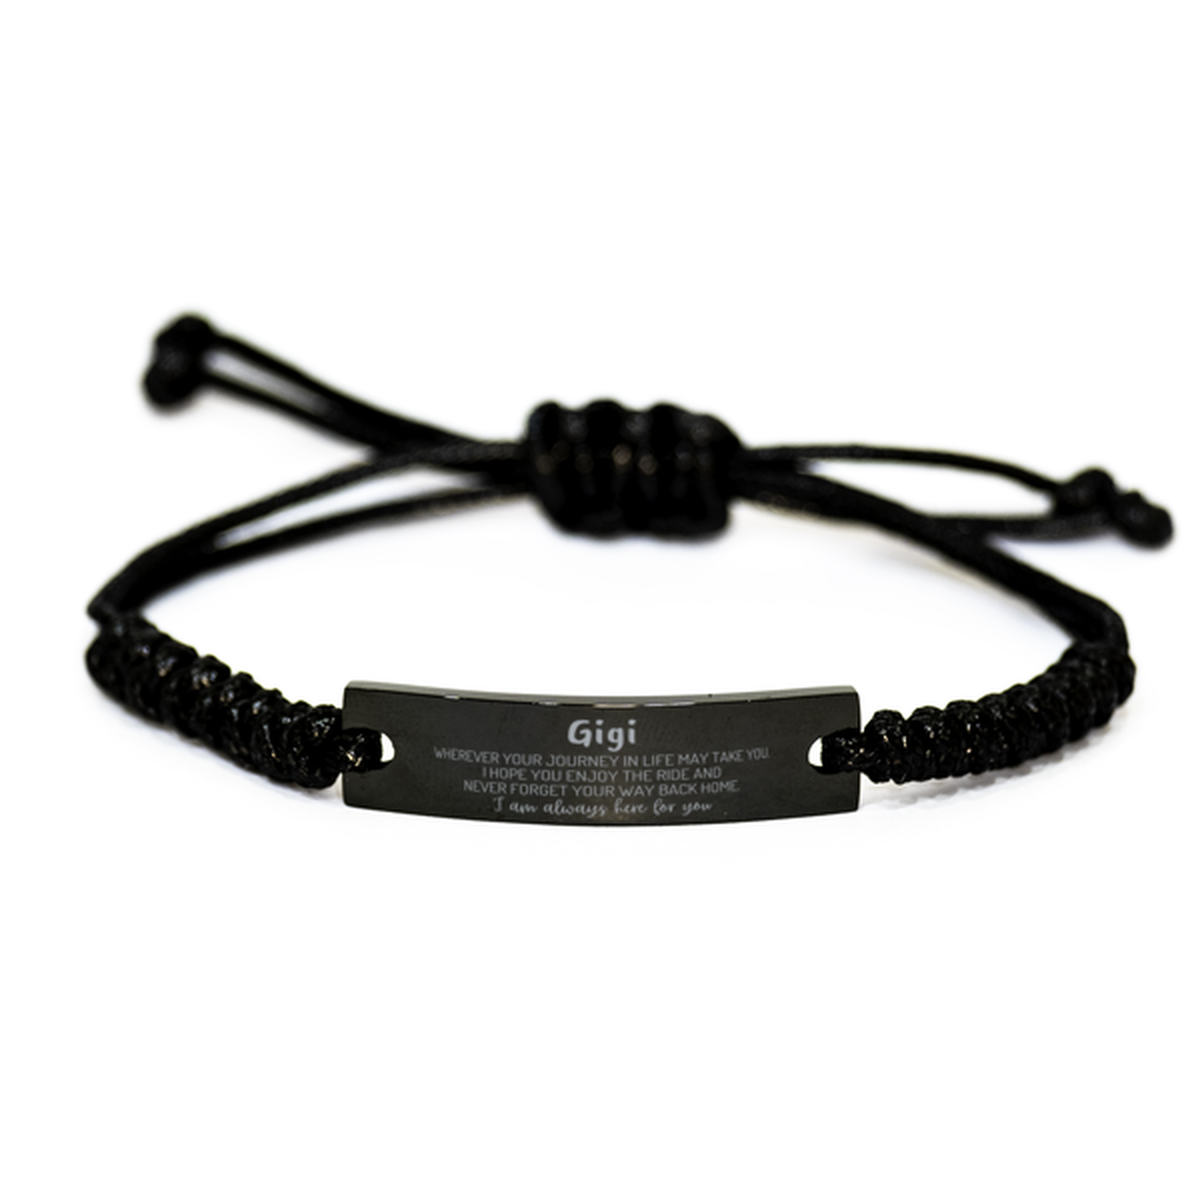 Gigi wherever your journey in life may take you, I am always here for you Gigi Black Rope Bracelet, Awesome Christmas Gifts For Gigi, Gigi Birthday Gifts for Men Women Family Loved One